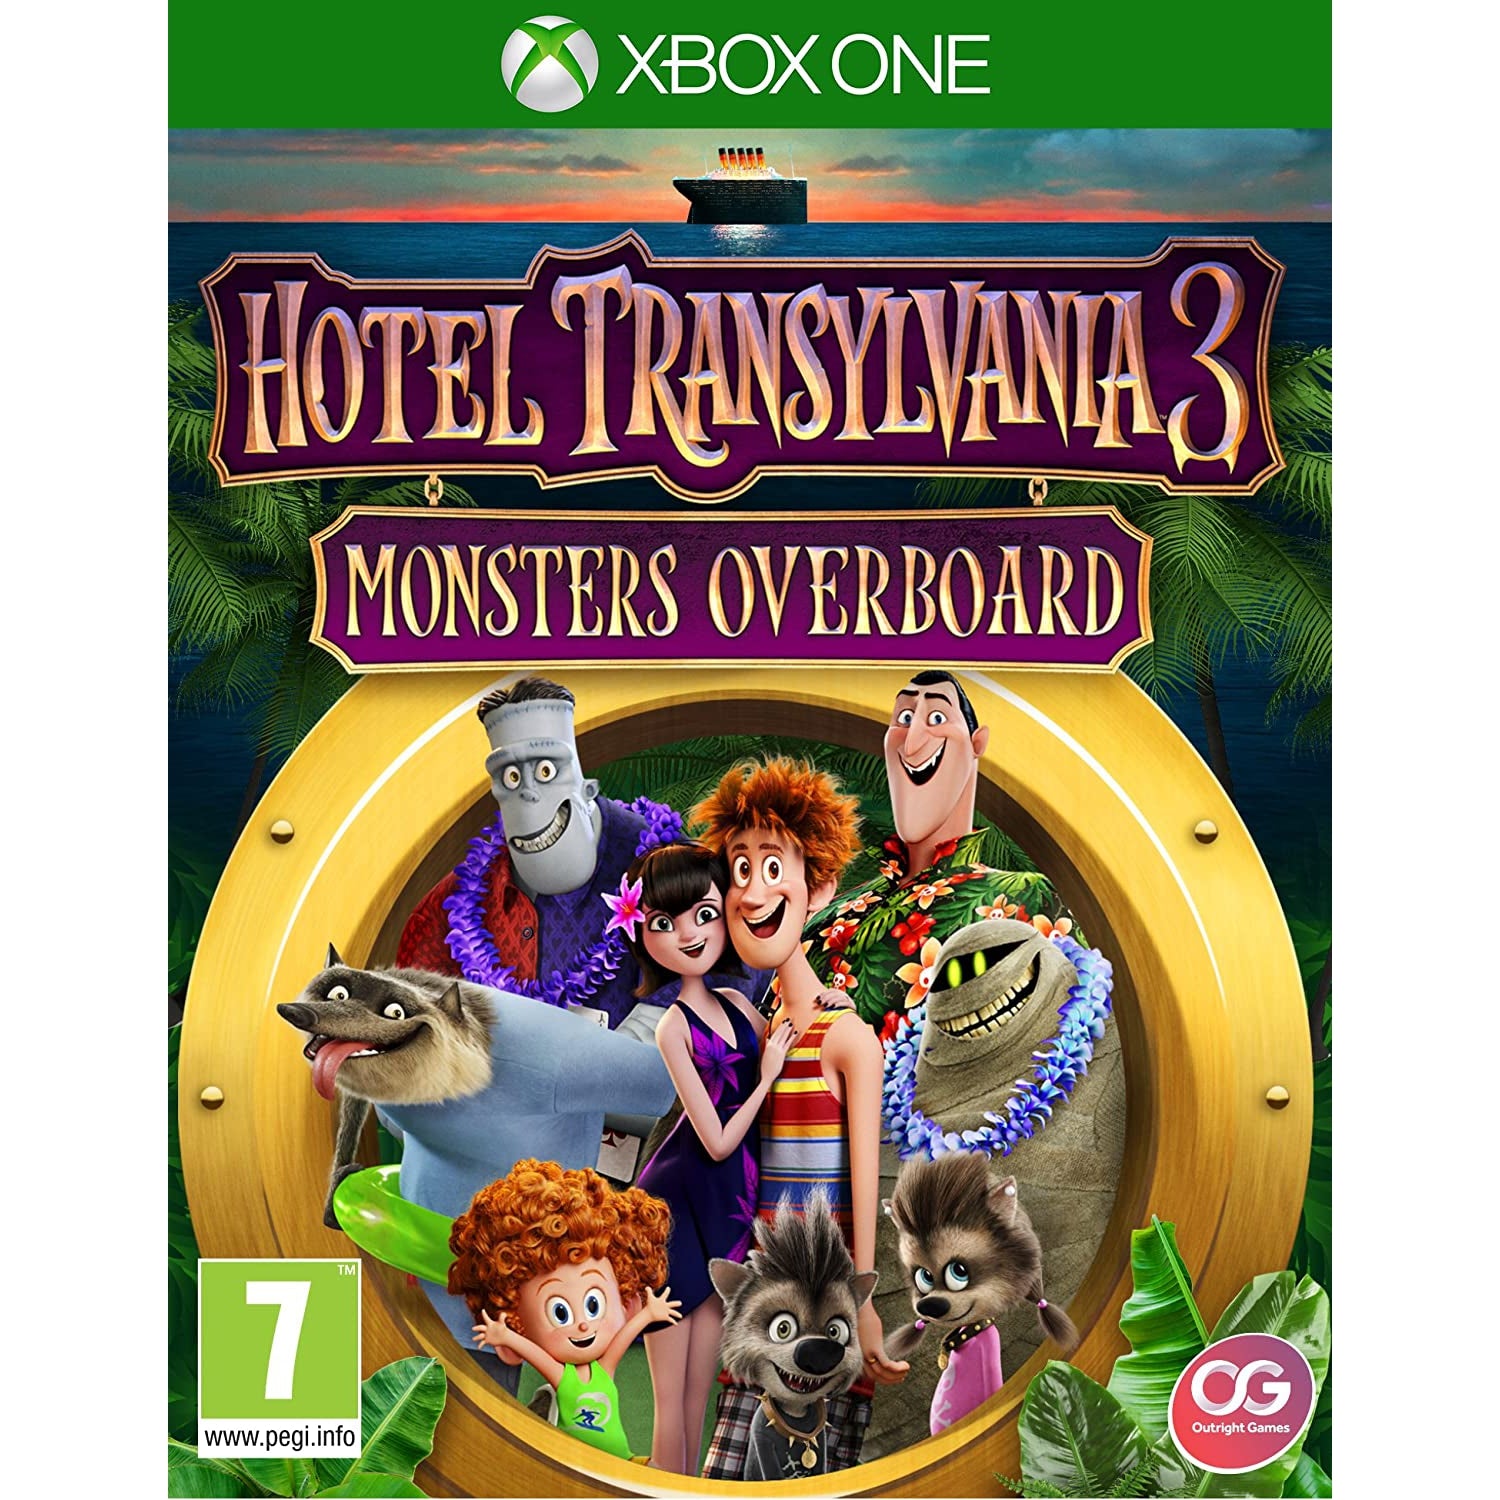 Hotel Transylvania 3: Monsters Overboard (XBOX One)